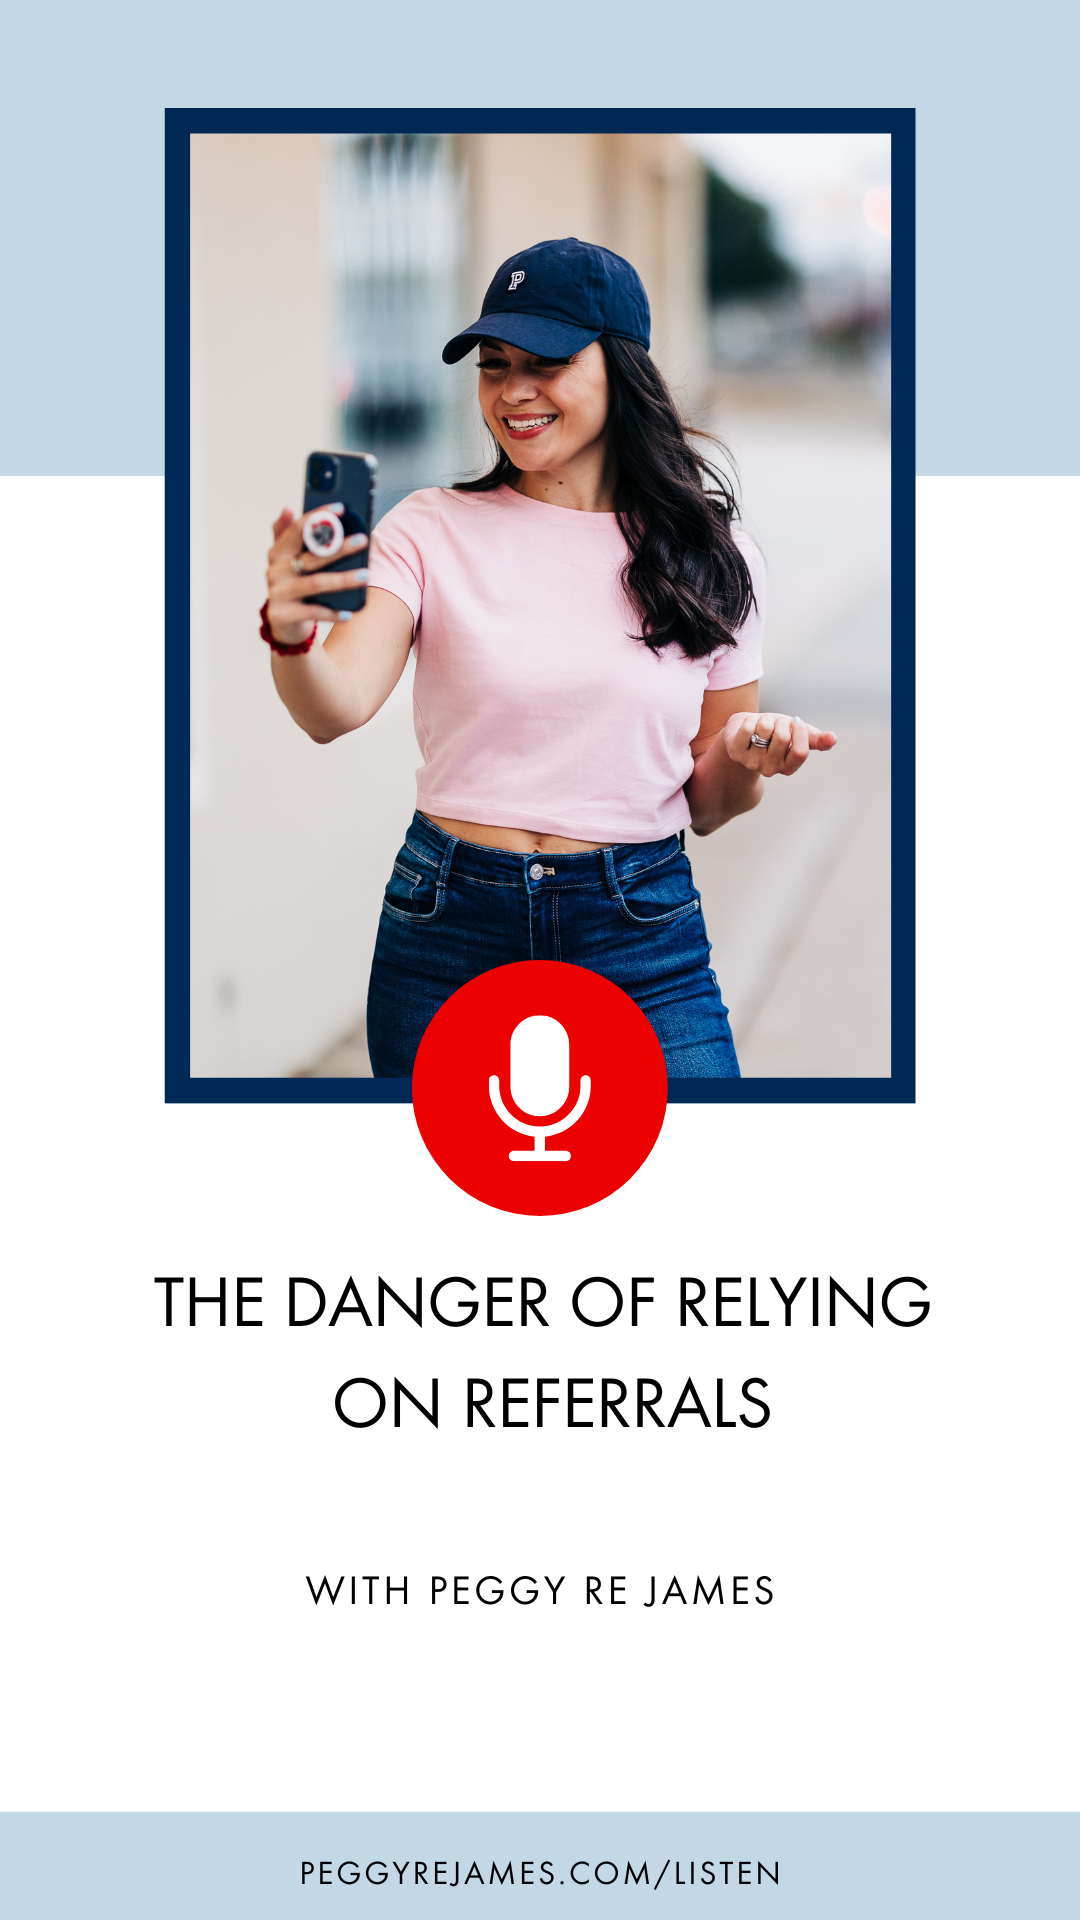 The danger of relying on referrals